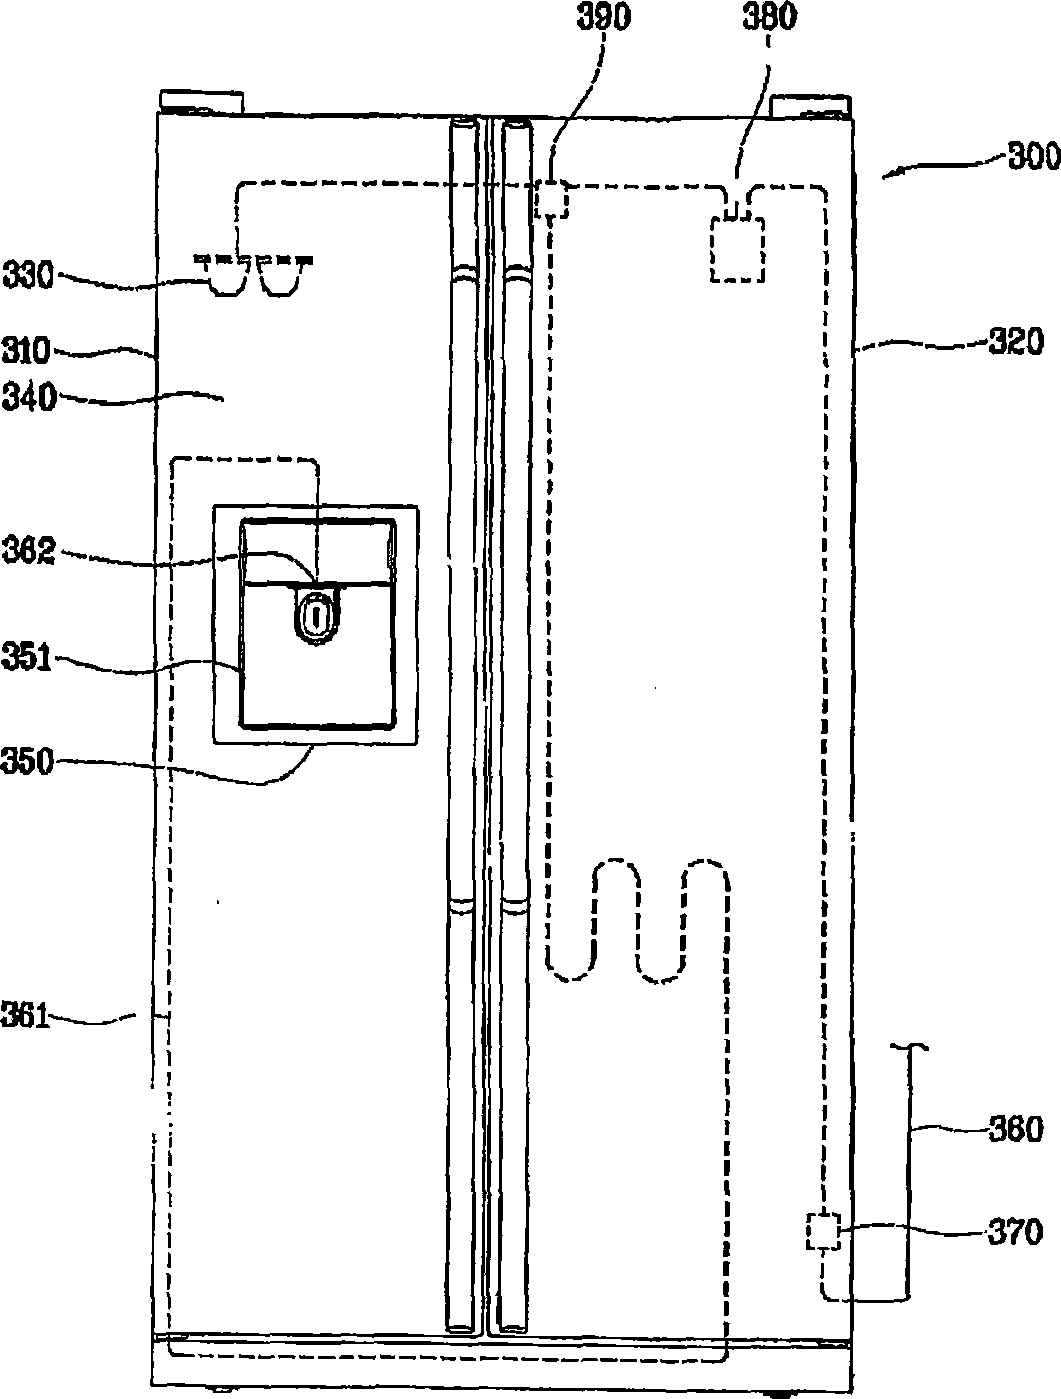 Apparatus for supercooling, and method of operating the same